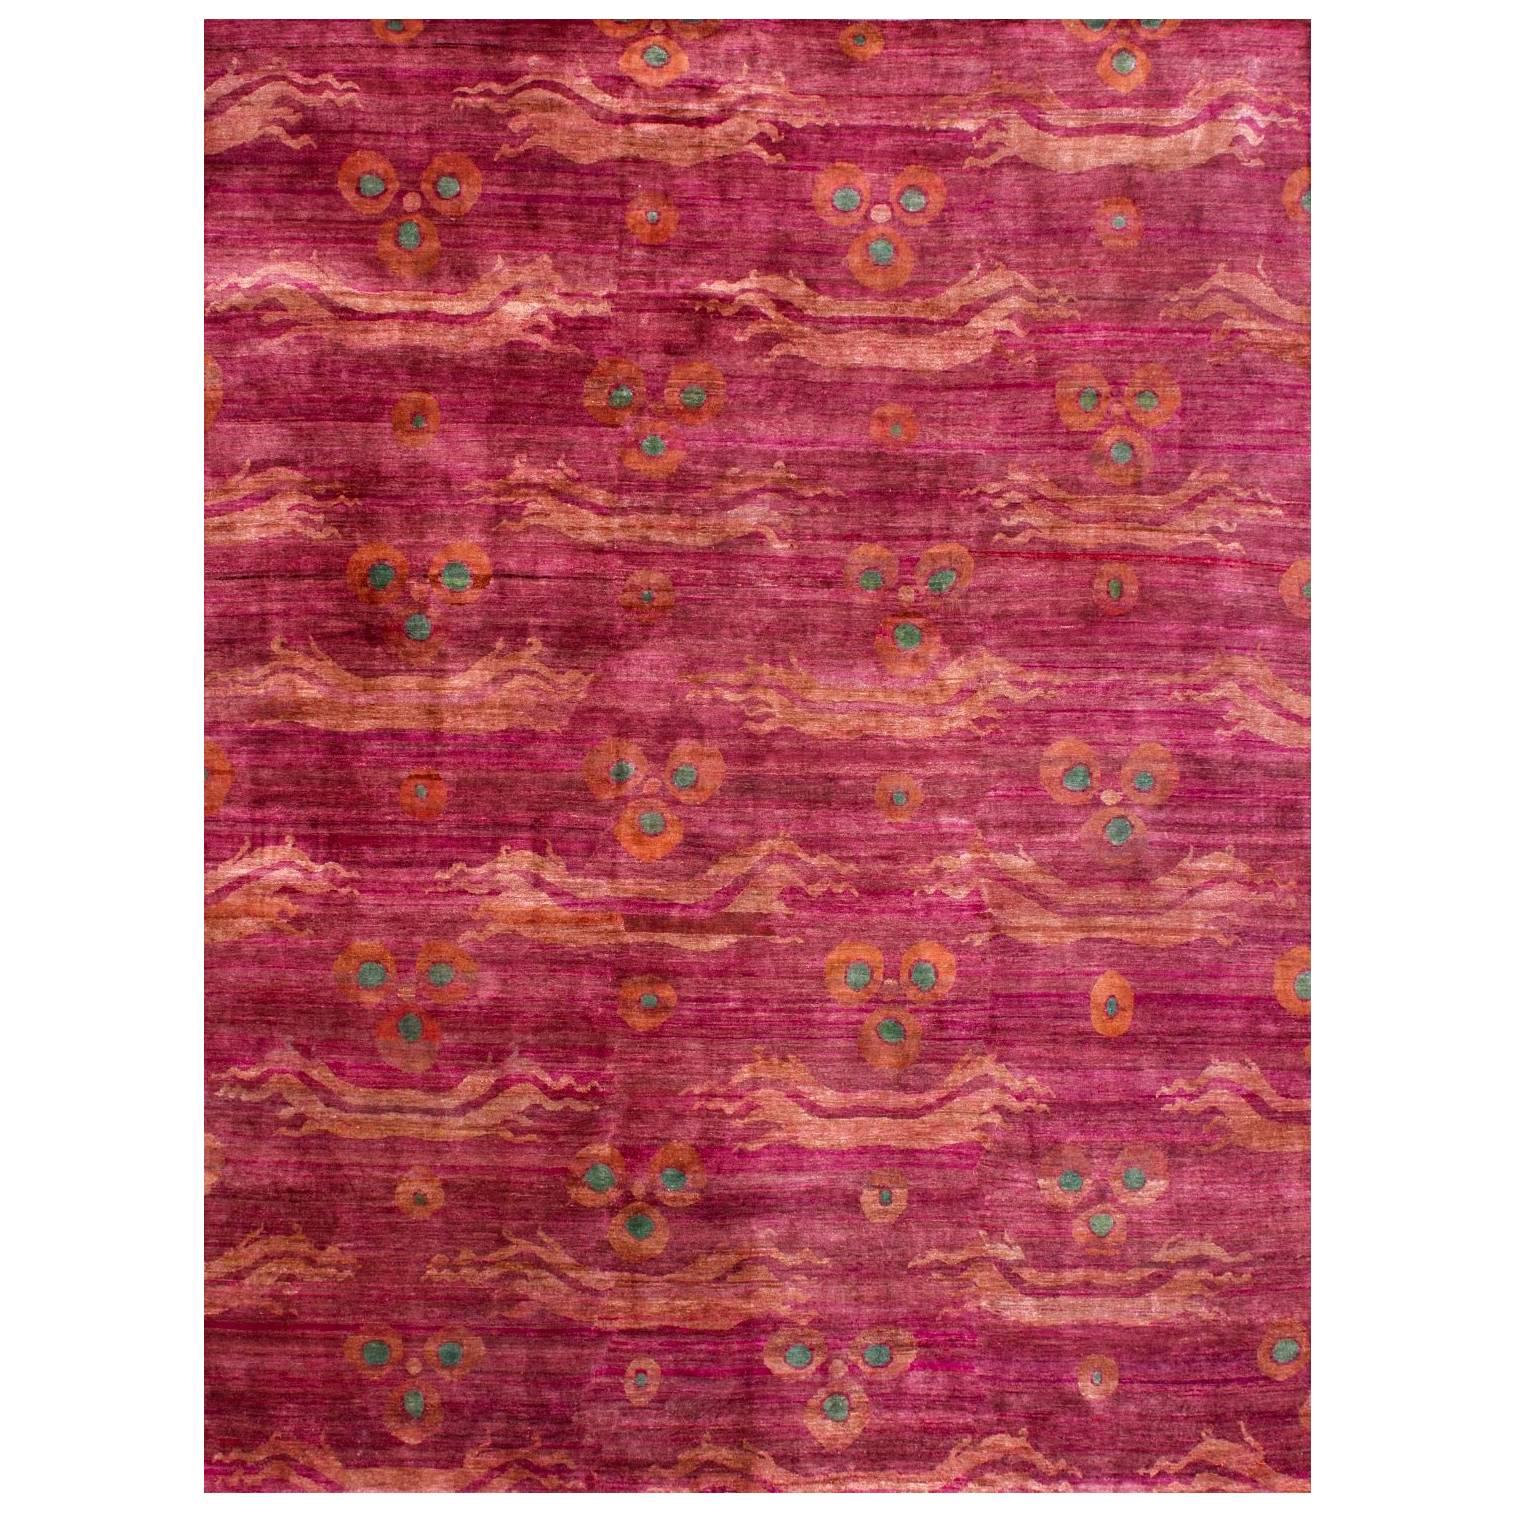 Pink Fuchsia Teal Ikat Design Hand-knotted Soft Natural Silk Rug